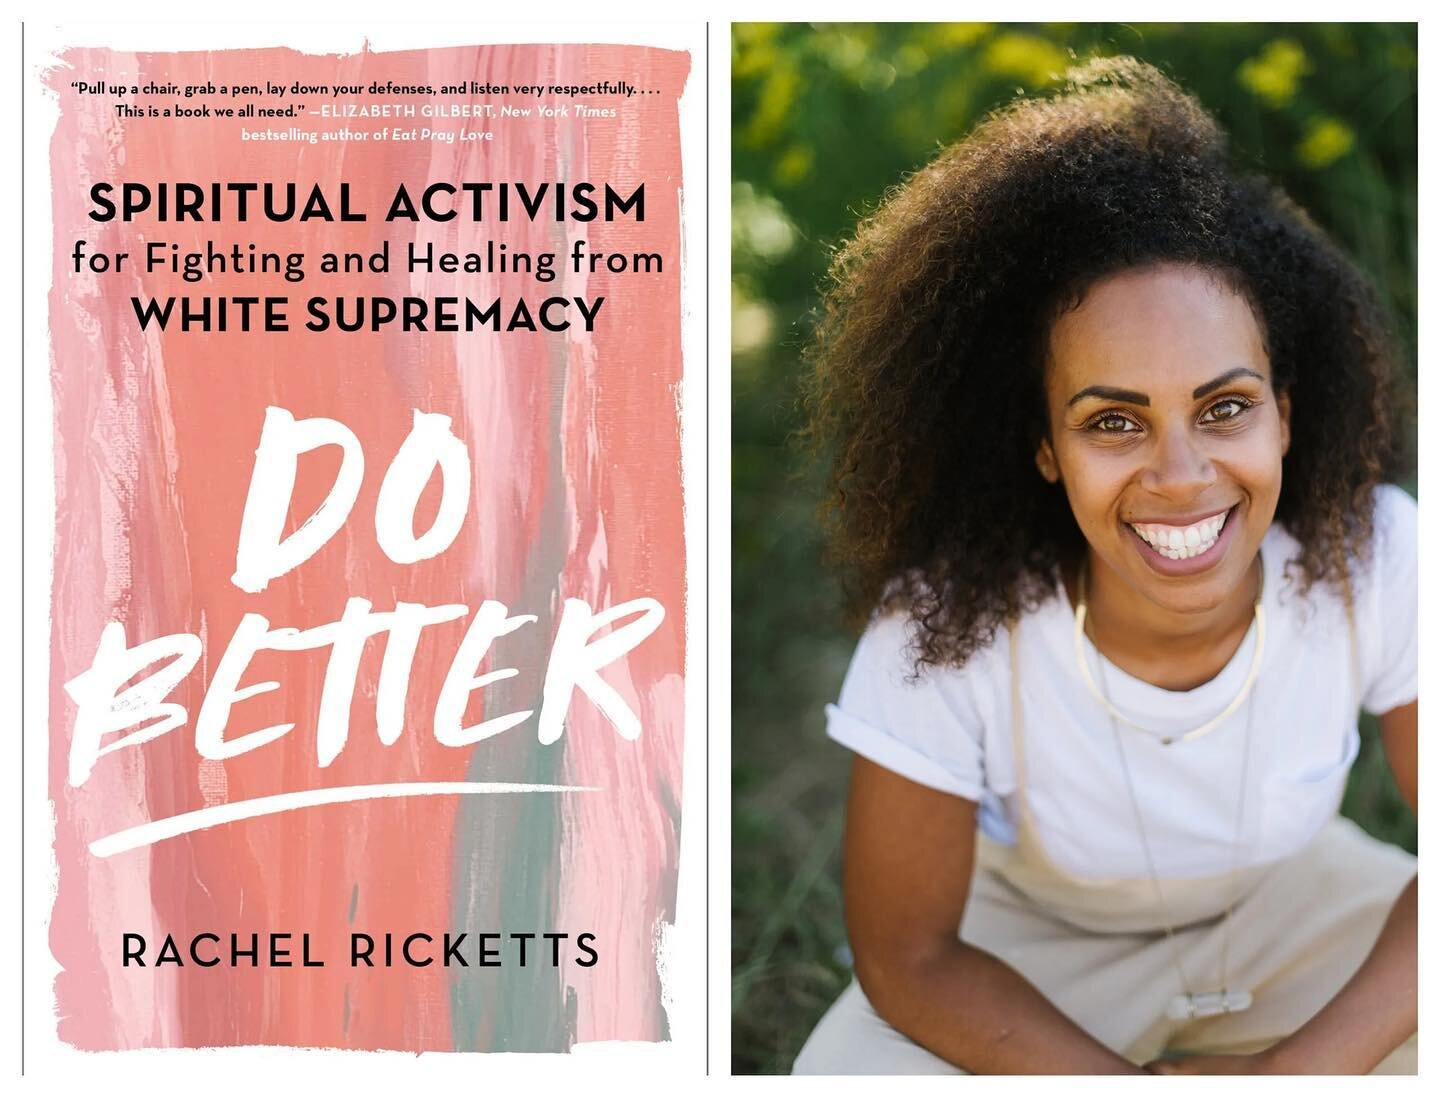 Ri is leading a zoom group on Rachel Ricketts&rsquo;: 
Know Better, Do Better: A Community Group for Fighting and Healing from White Supremacy

This Spring, let's close the gap between knowing and doing and figure out what it means to really live the